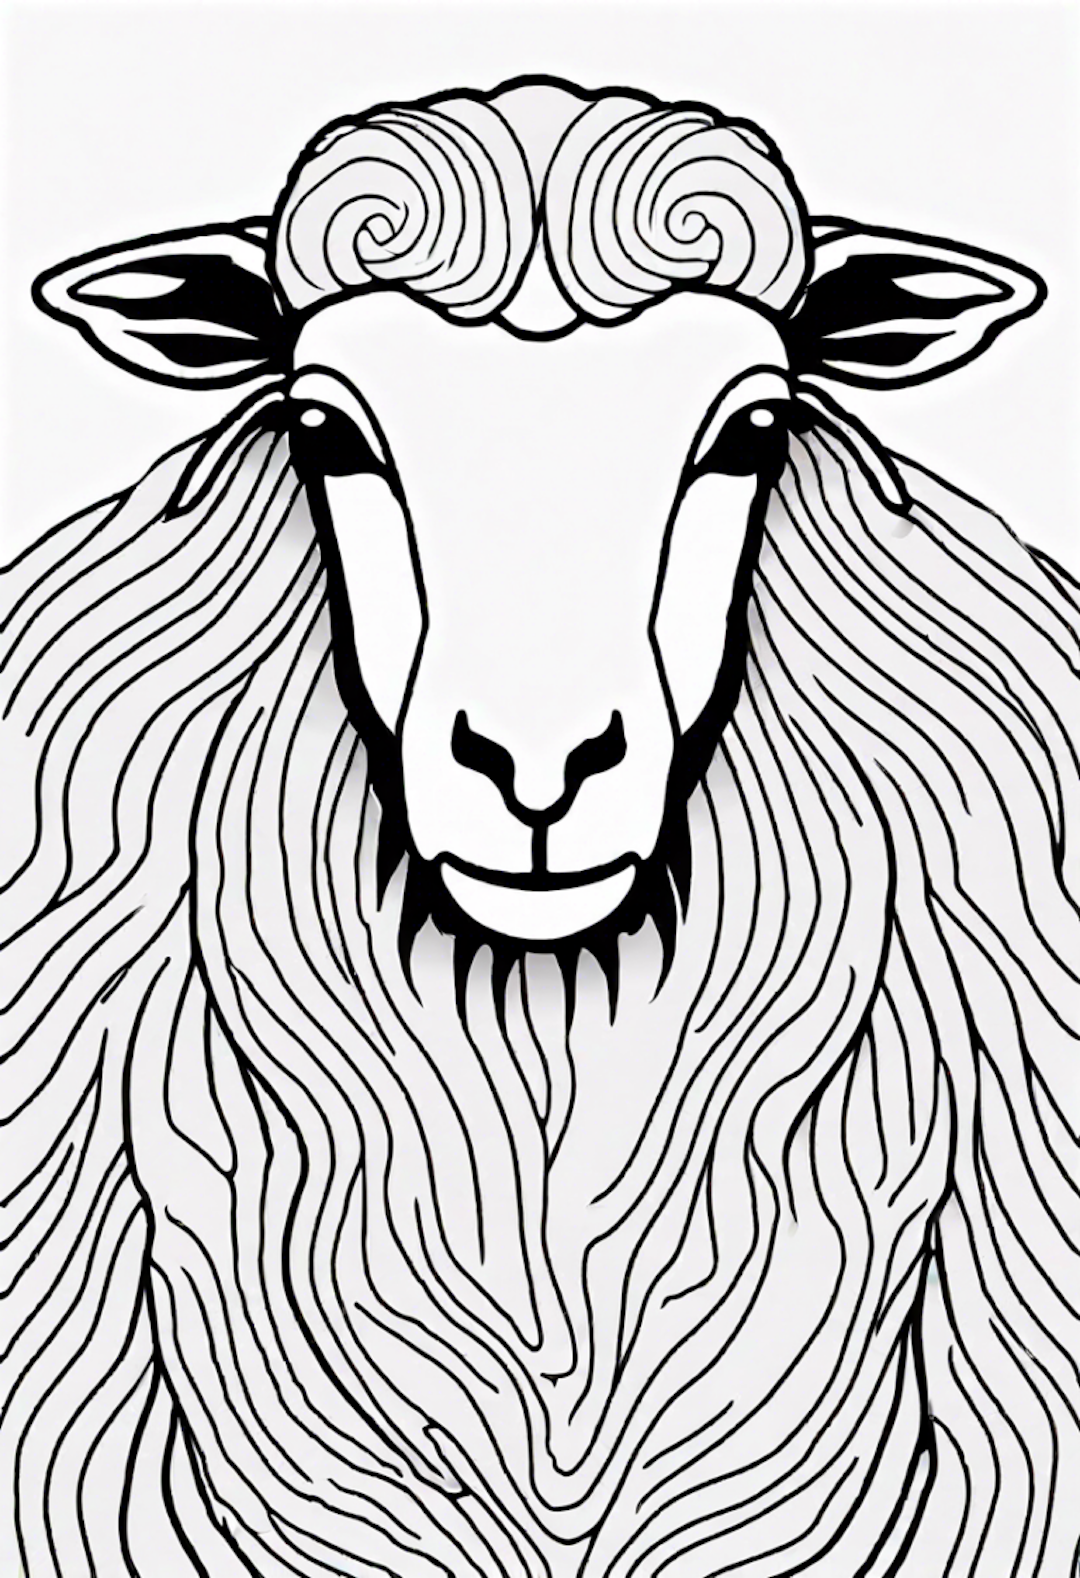 Majestic Sheep Coloring Page coloring pages